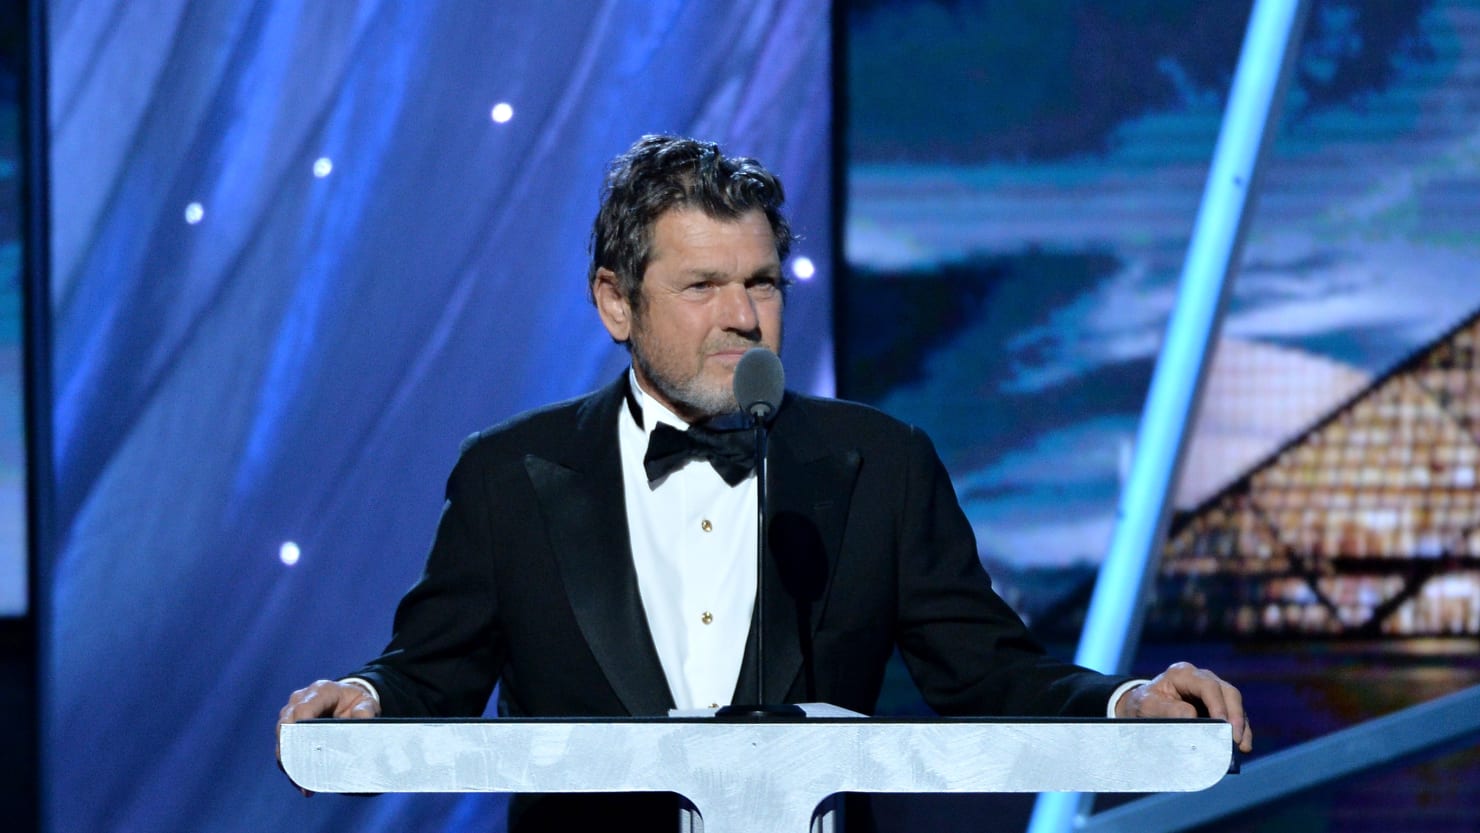 ‘Rolling Stone’ Throws Its Founder Jann Wenner Under the Bus